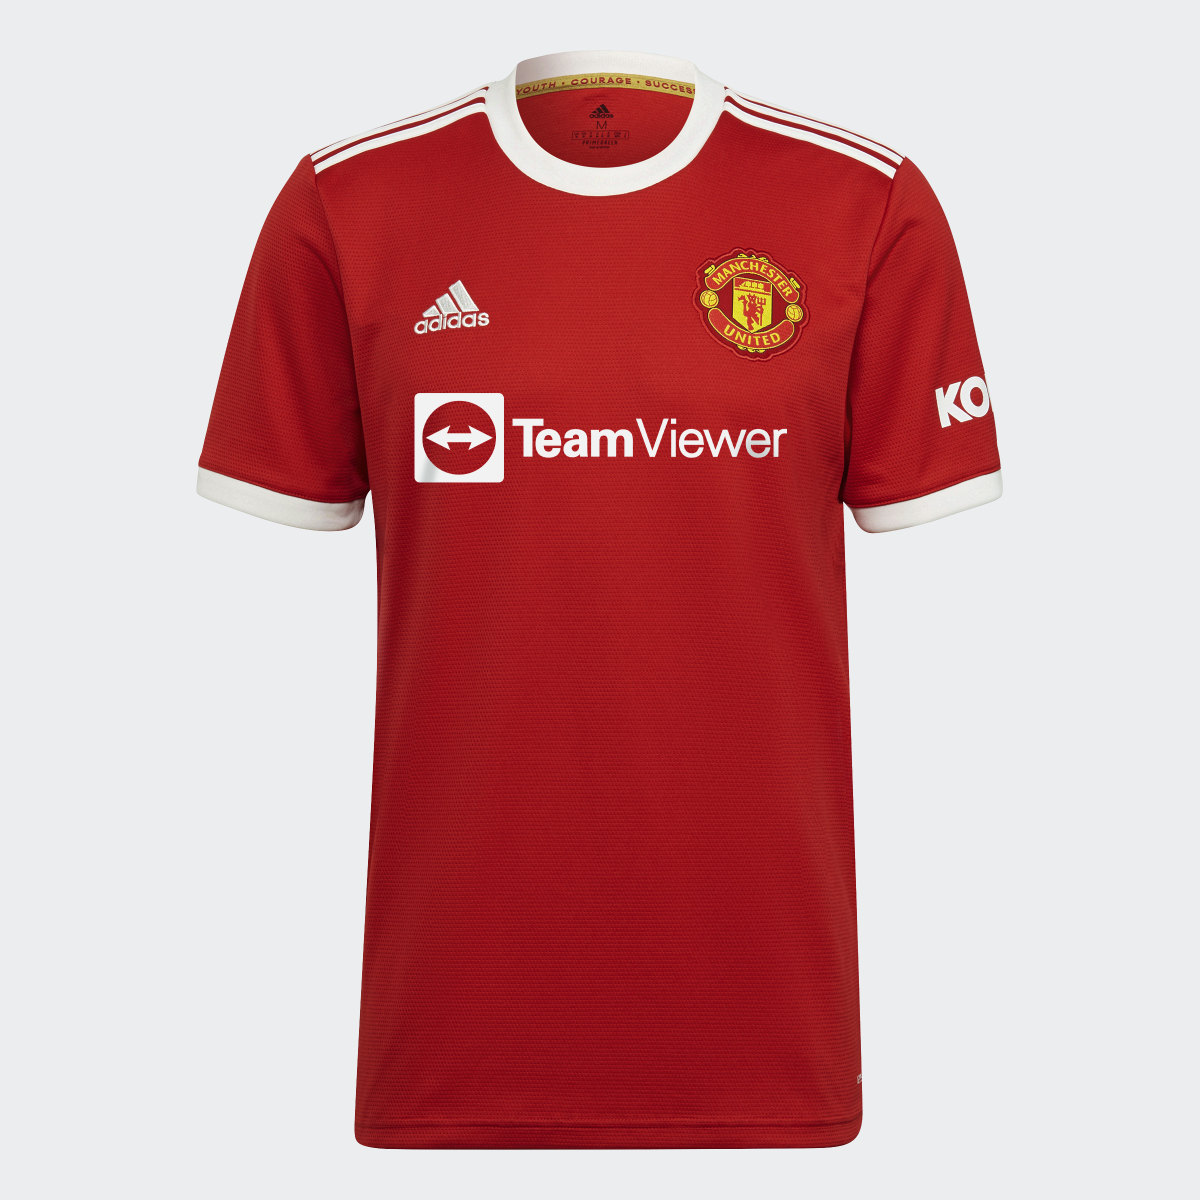 Adidas Maillot Domicile Manchester United 21/22. 5